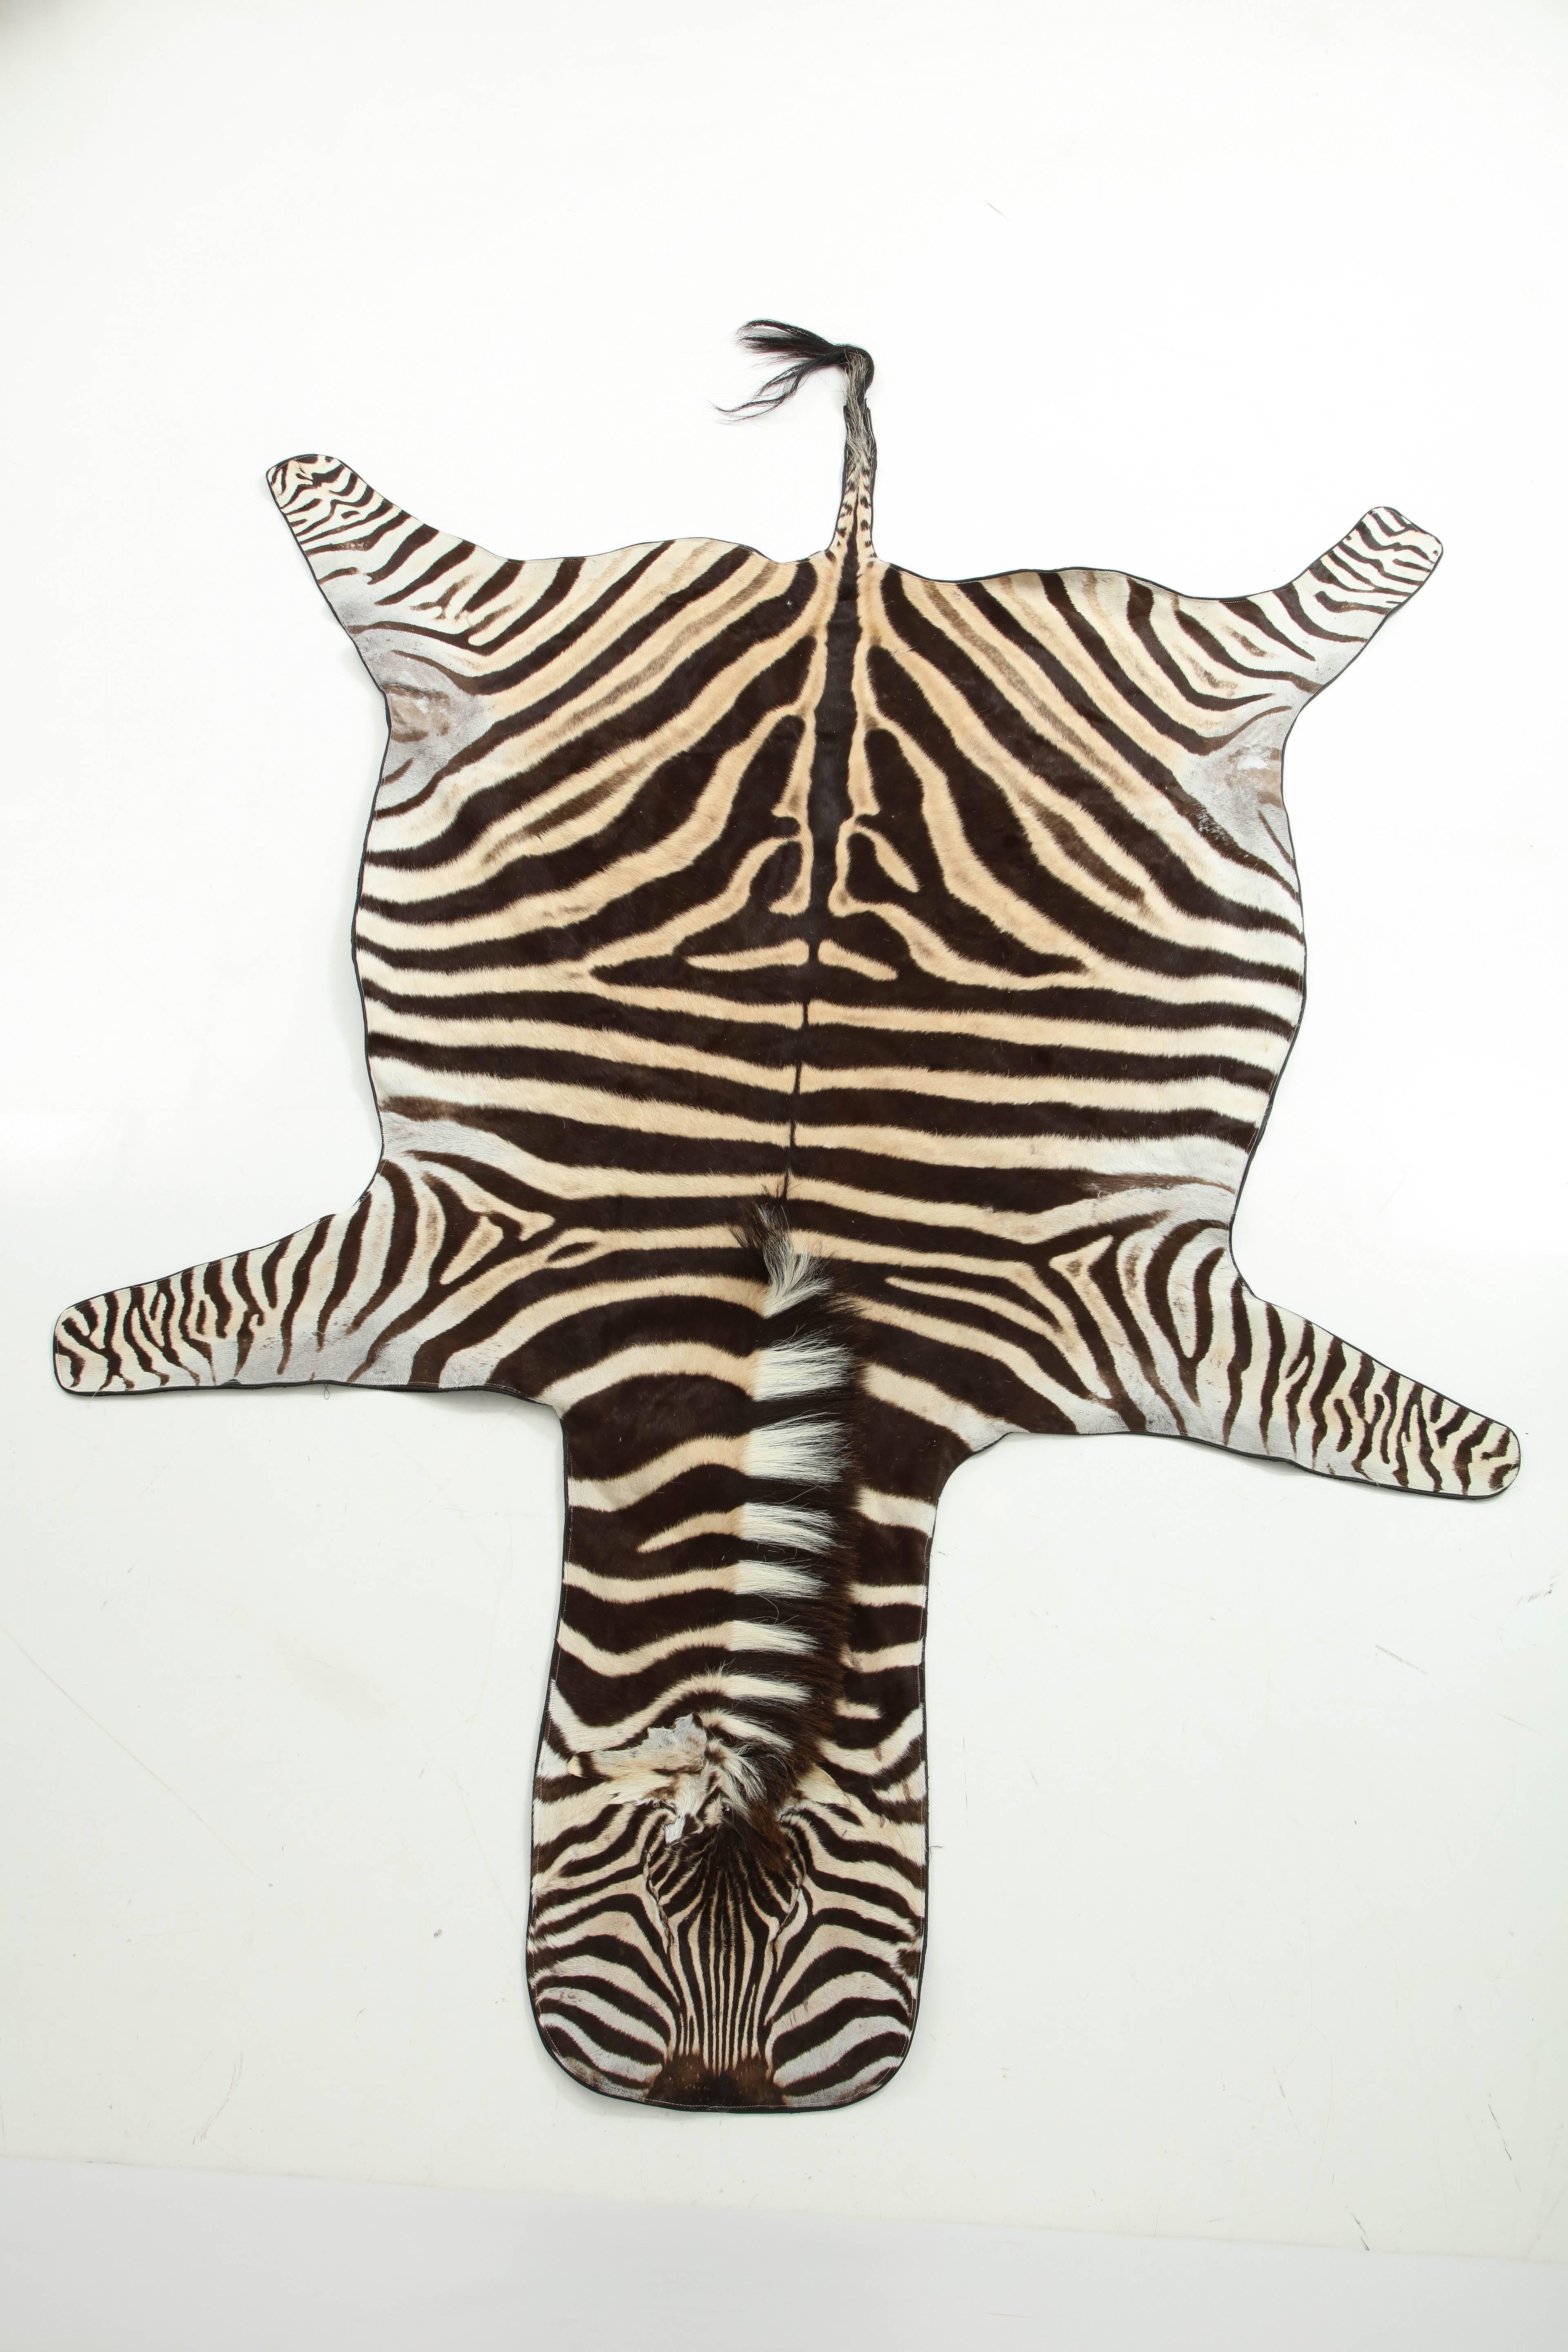 Decorative zebra rug. The hide is backed with black wool felt and trimmed with leather all around. The measurement is from the nose to the rump. The tail is not included in the measurement. The width is on the belly.